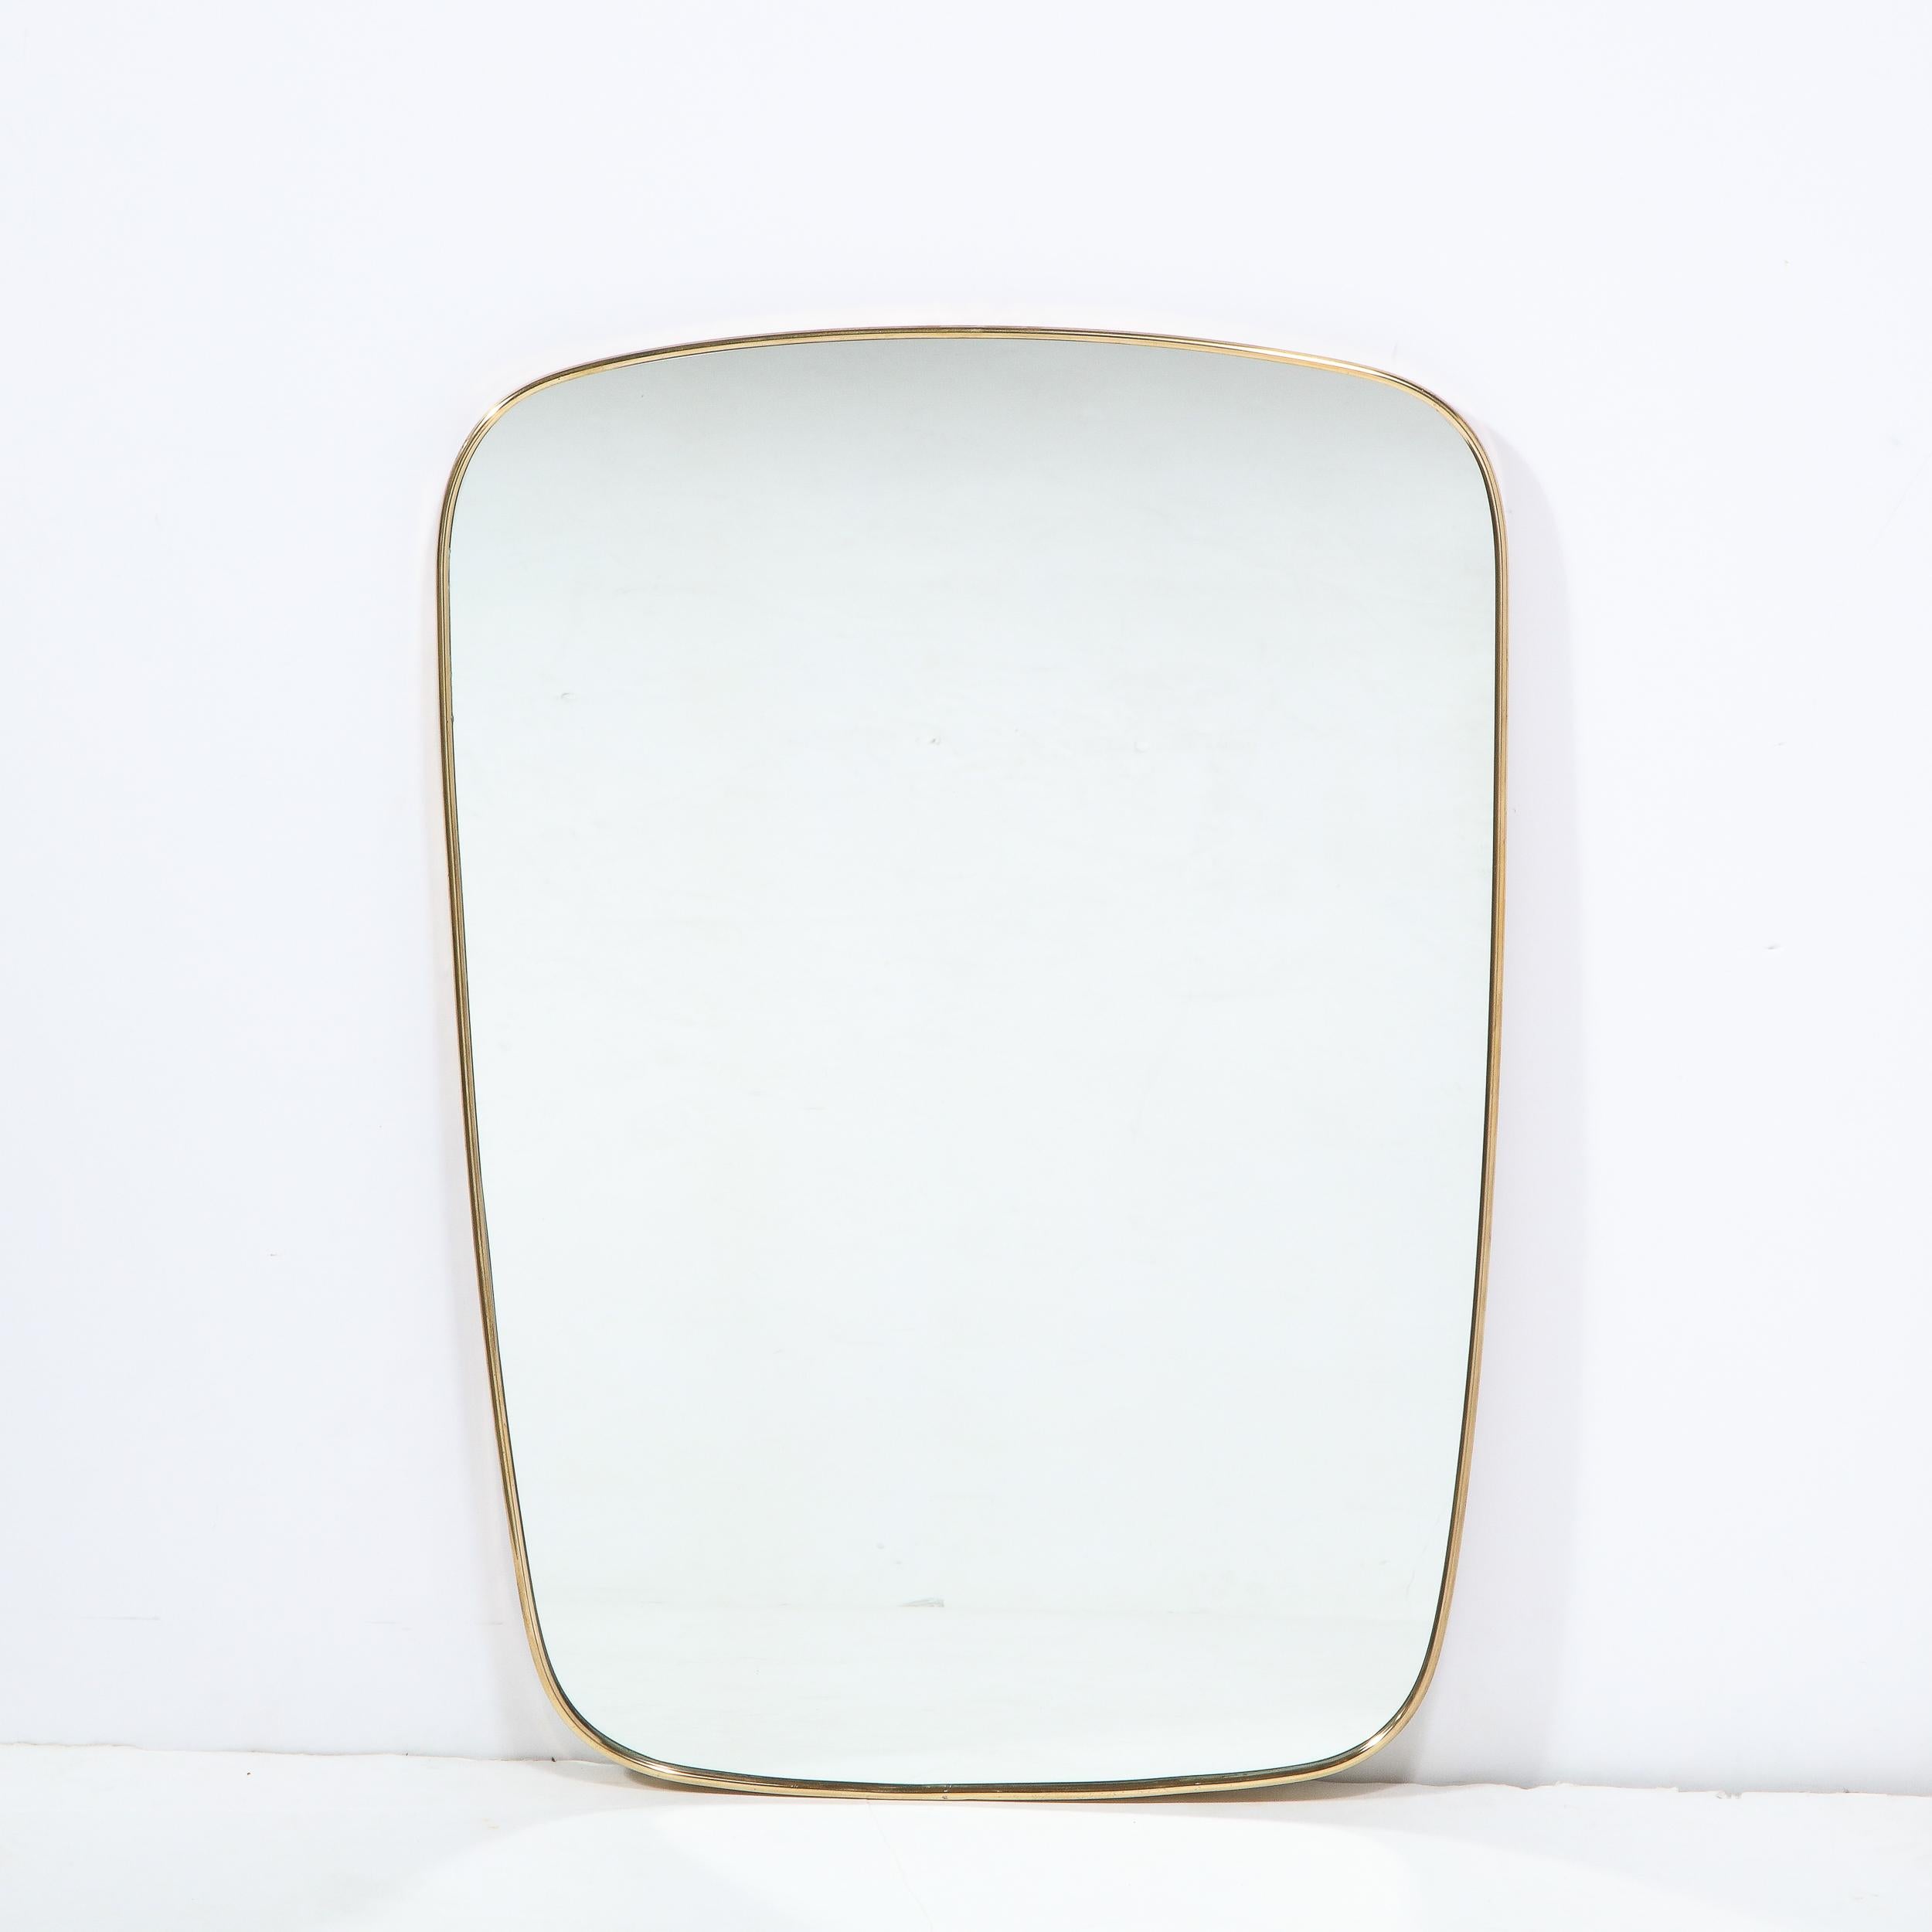 This elegant and understated Mid-Century Modern wall mirror was realized in Italy, circa 1950. It features a rectangular form with rounded corners tapering slightly toward the bottom. This piece is a study in the simplicity of great design, quietly